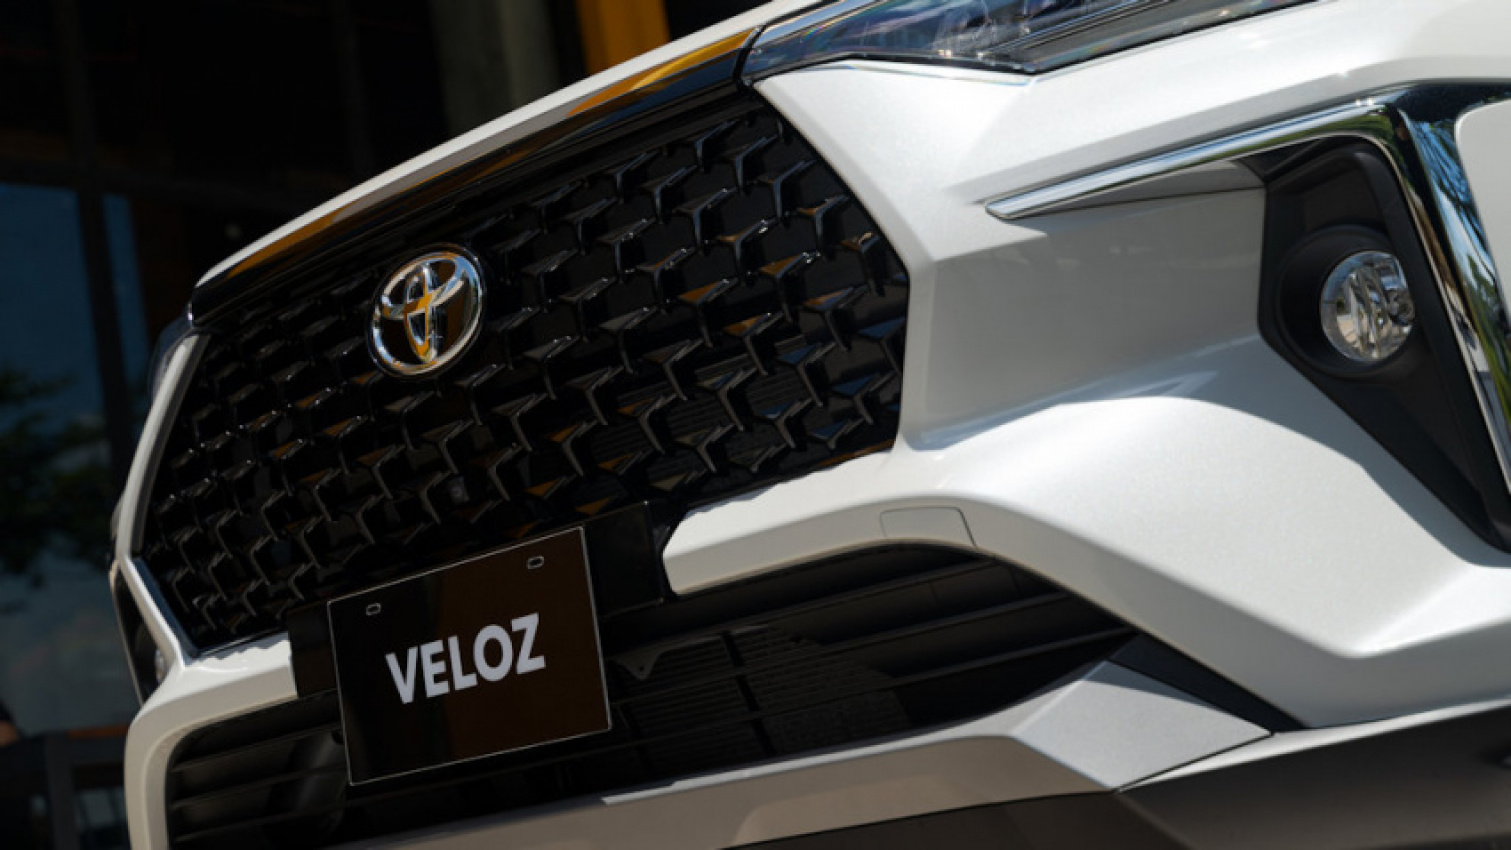 autos, cars, toyota, news, sub-compact suv, toyota corporate, toyota veloz, toyota dealers accepting veloz reservations this week, launch slated for april 29